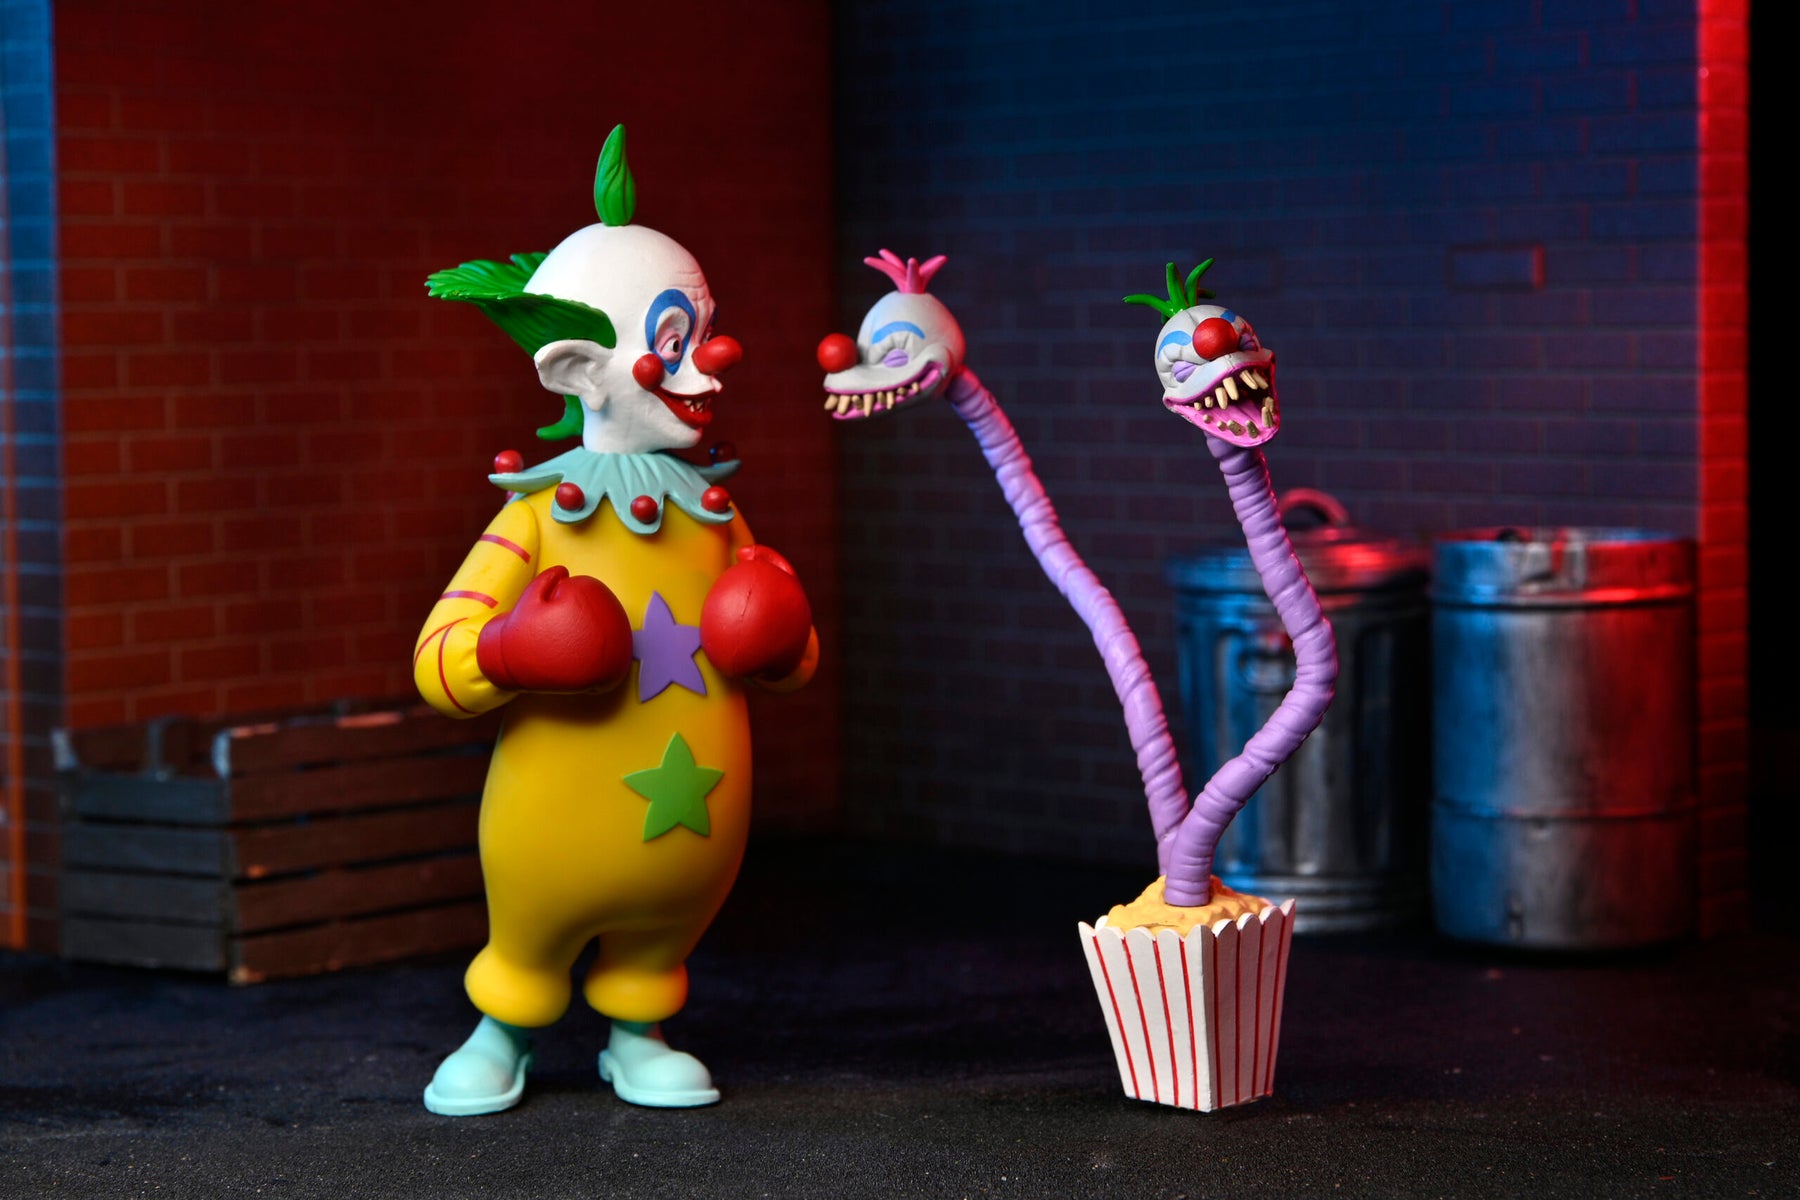 NECA - Toony Terrors Shorty (Killer Klowns From Outer Space) 6" Action Figure